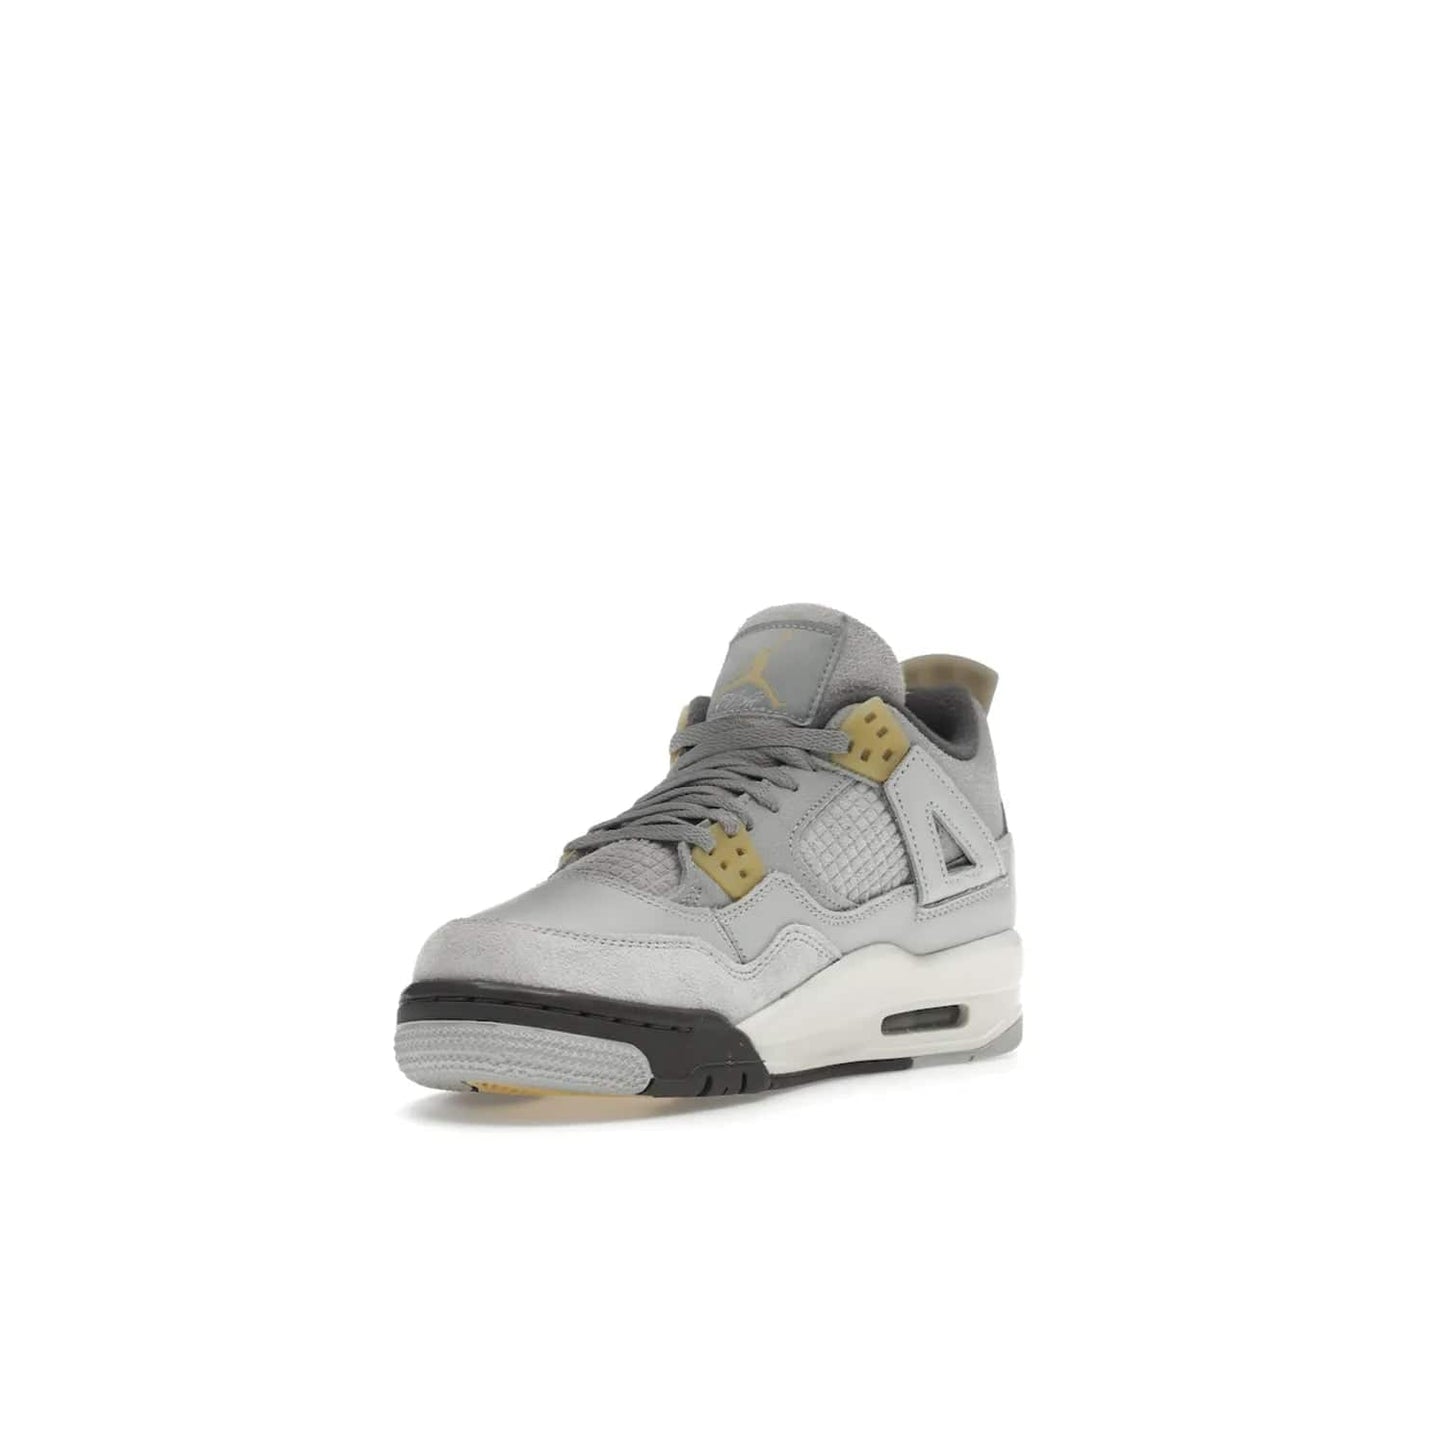 Jordan 4 Retro SE Craft Photon Dust (GS) - Image 14 - Only at www.BallersClubKickz.com - Shop the Jordan 4 Retro SE Craft Photon Dust (GS), the ultimate mix of style and comfort. With photonic dust, pale vanilla, off-white, grey fog, flat pewter and sail colorway, foam midsole, and rubber outsole, don't miss this special edition Jordan 4 releasing Feb 11, 2023.